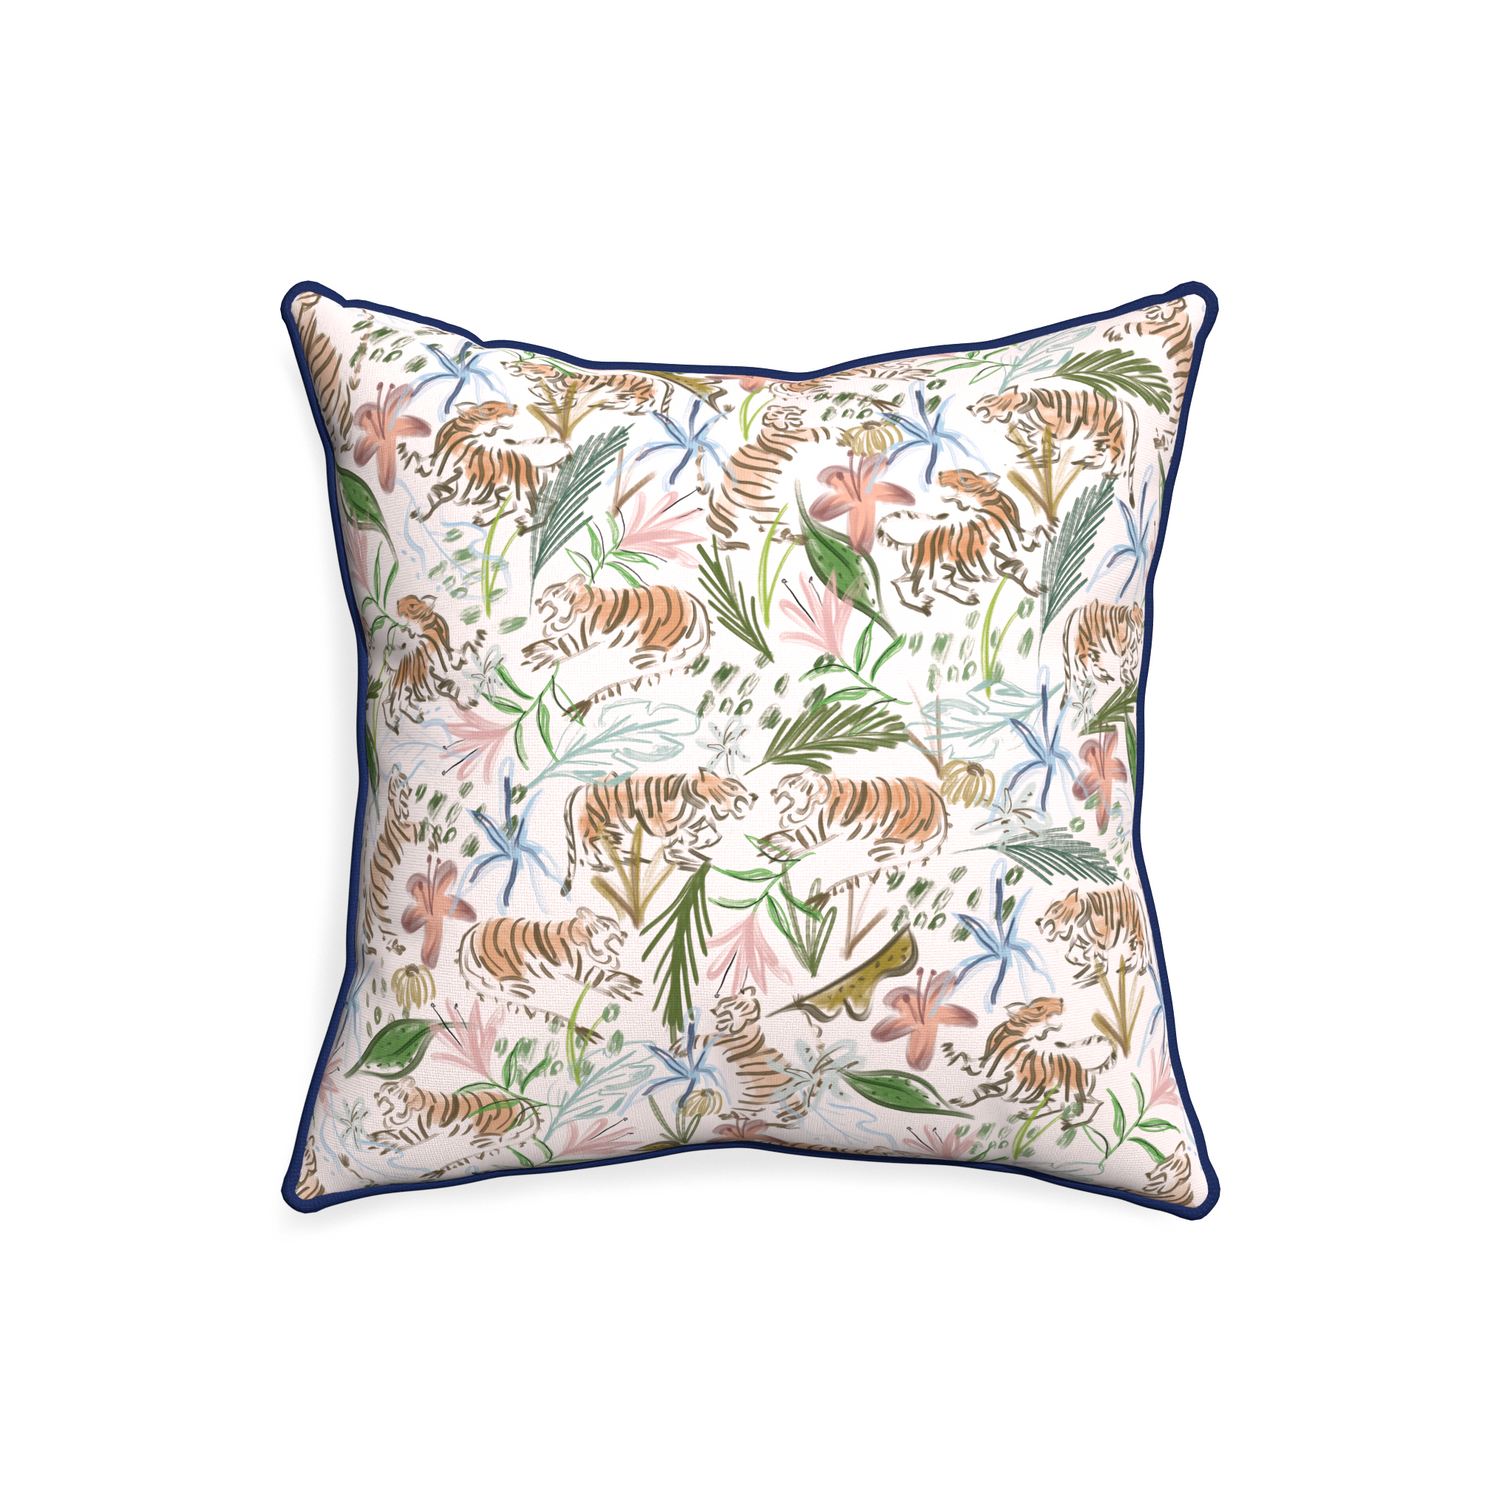 20-square frida pink custom pink chinoiserie tigerpillow with midnight piping on white background